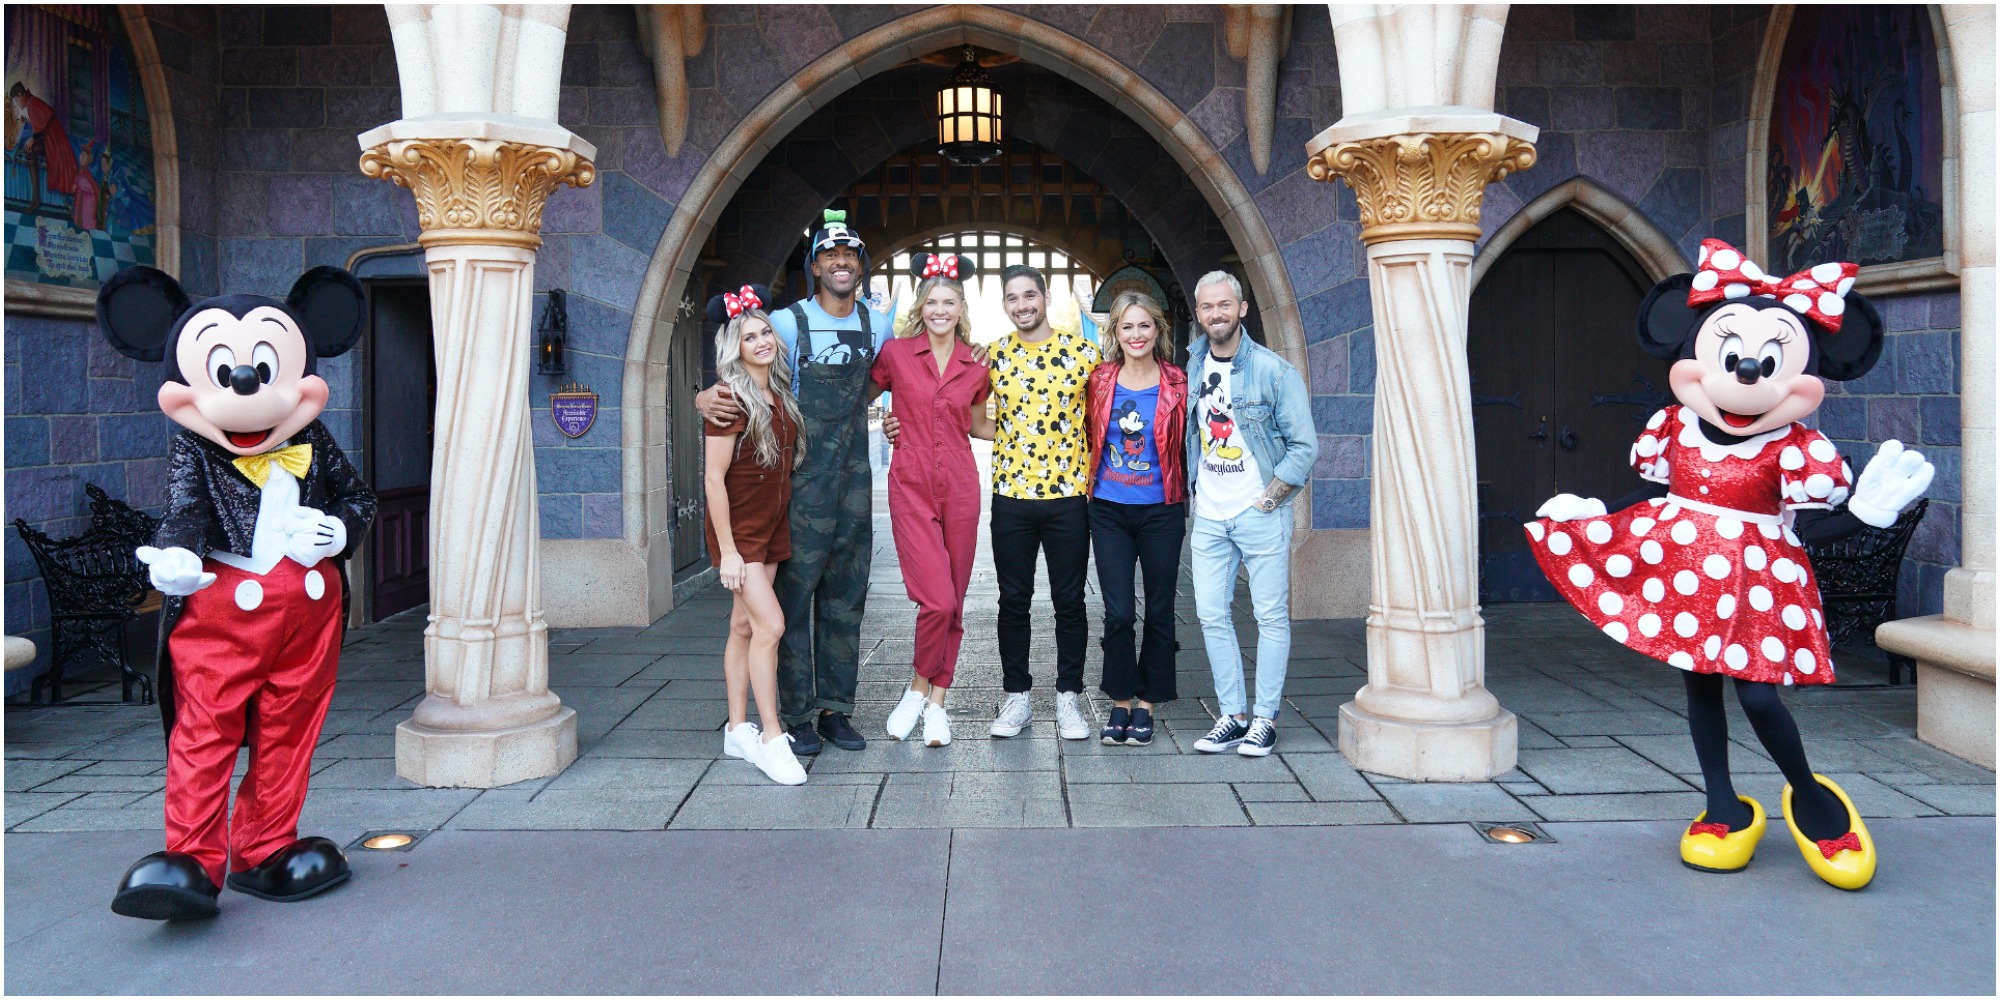 Celebrities and pros of Dancing with the Stars season 30 pose at Disneyland.